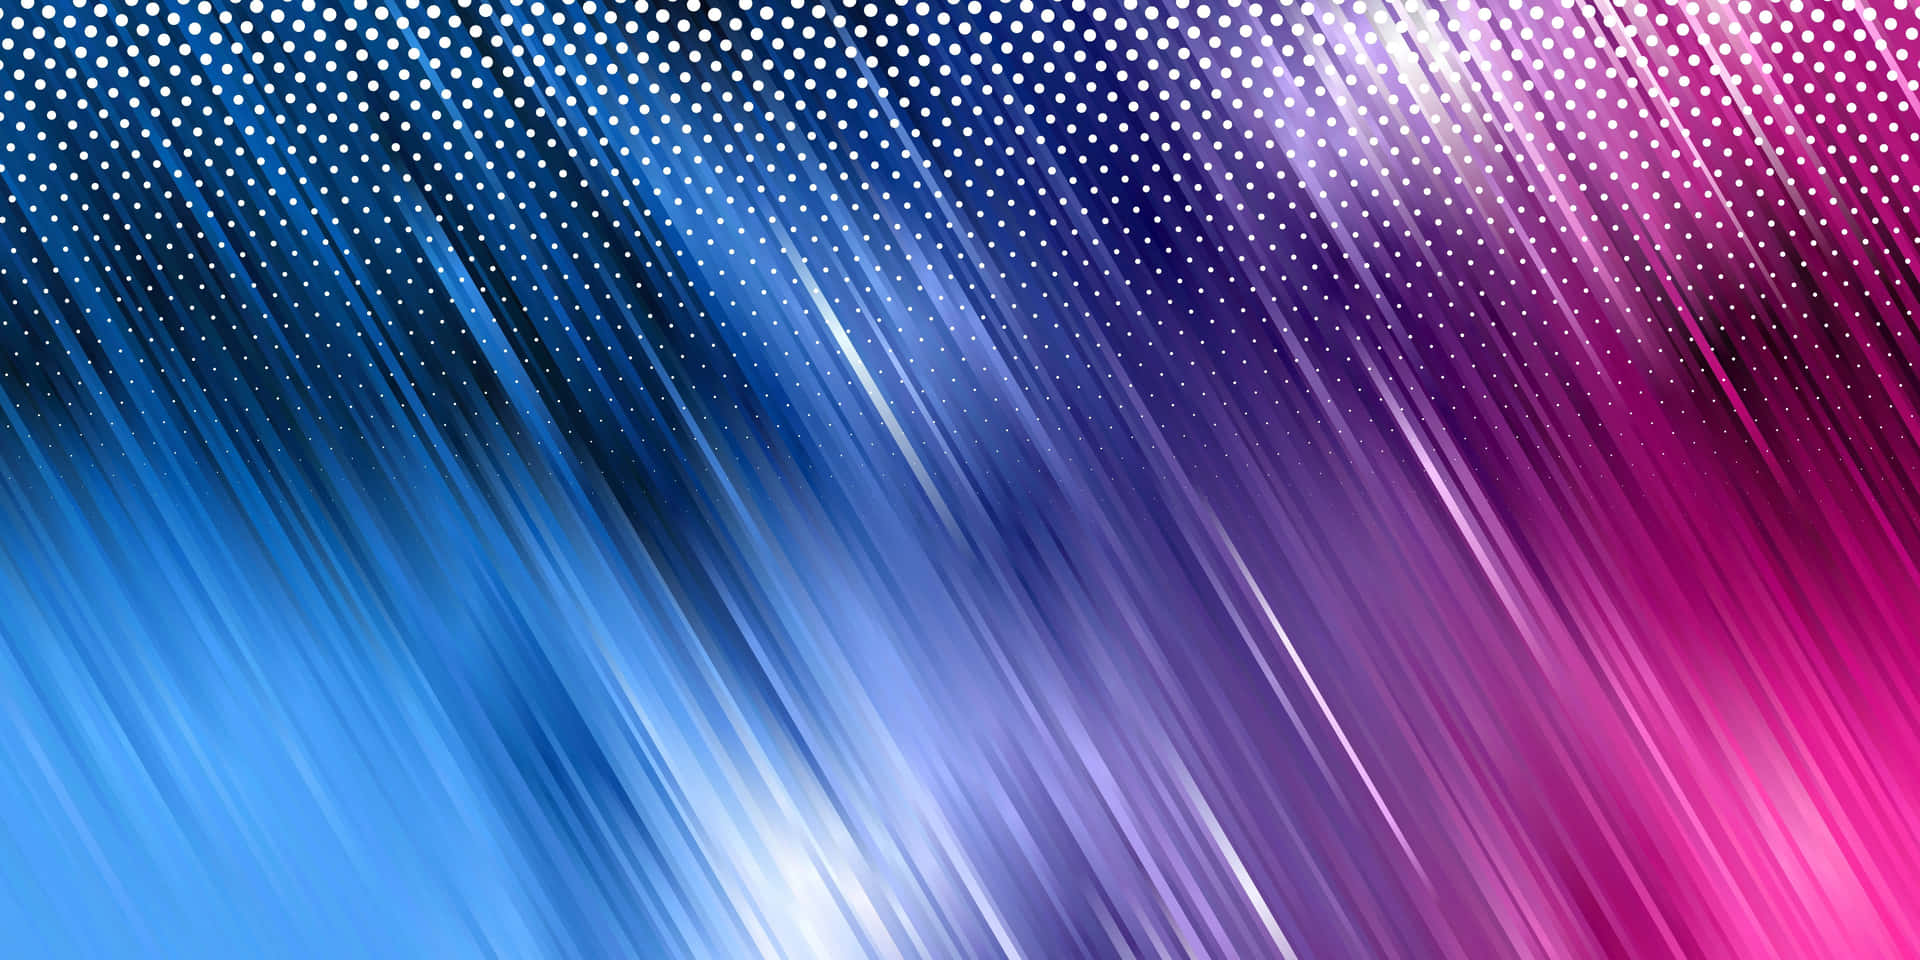 A Blue And Pink Abstract Background With Lines